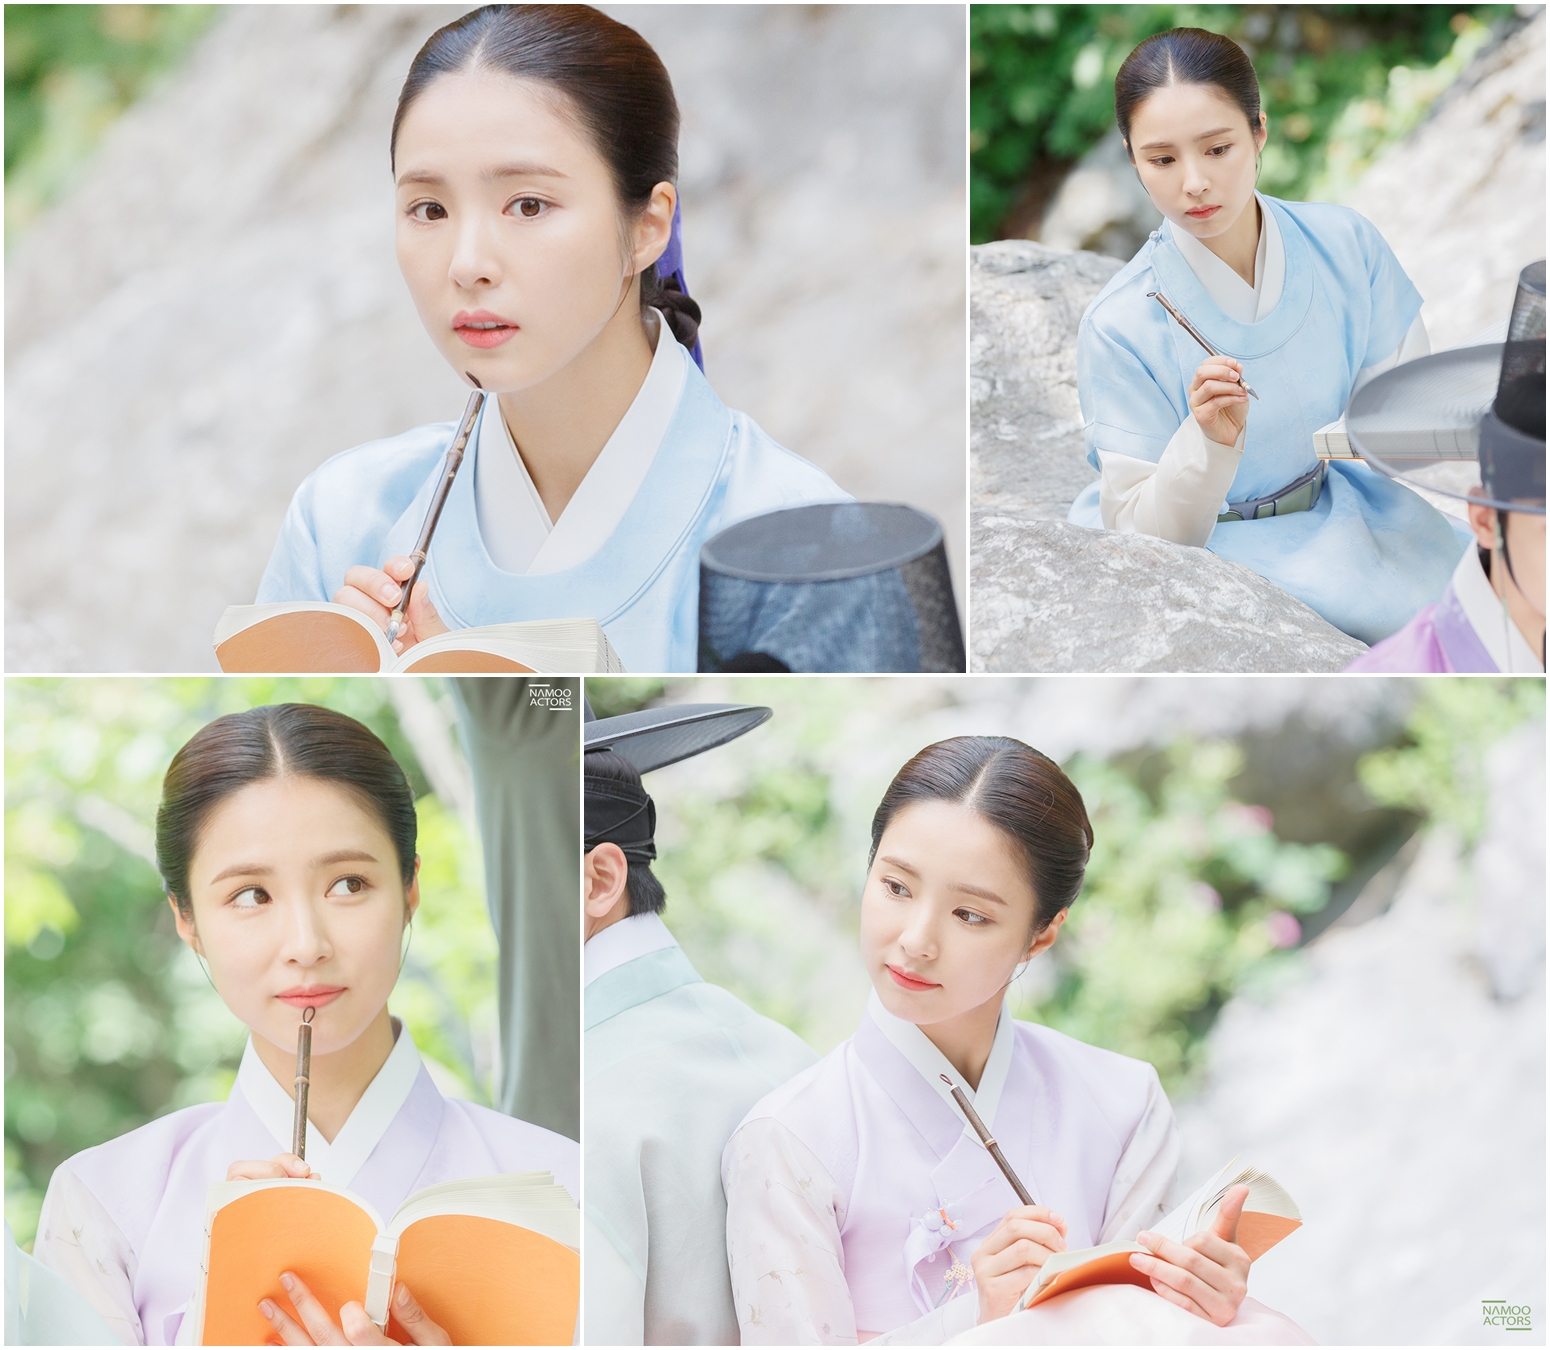 Attention is focusing on Shin Se-kyungs performance to be shown in the new employee, Na Hae-ryung.Just tomorrow, MBCs new drama Na Hae-ryung, which is about to be broadcasted first.Among them, expectations for actor Shin Se-kyung, who plays the title role of the drama, are increasing day by day.Shin Se-kyung is expected to play the role of Na Hae-ryung, who is reborn as a true officer, and to give fresh fun and thrilling thrills that he has never felt before.Na Hae-ryung, played by Shin Se-kyung, spent his childhood in the Qing Dynasty and was a curious free soul for the world.When I feel thirsty in the 19th century Joseon, which is filled with Confucianism, I pass the entrance to the palace with a dignified entrance to the palace.Na Hae-ryung, who is reborn as a true officer in this process, will increase his immersion in the drama.Among them, Shin Se-kyungs behind-the-scenes Steel Series, which has transformed into a character in the drama, is attracting attention.SteelSeries, released, shows Shin Se-kyung working on filming the poster for the new employee, Na Hae-ryung.Even in the heat of the early days, he showed off his veteran actor.Set in a picturesque blue recording, Shin Se-kyung is keen on poster shoots.He is planting Na Hae-ryung through his serious but playful eyes and changing facial expressions.Especially, the characteristics of the character called the officer who records history are shown by using props such as book books and brushes, and it leaves a deep impression.From the woman of the 19th century Joseon with a full spirit of dignity to the officer who believes that everyone is equal in front of the brush.The colorful aspects of the characters in the drama will be born more stereoscopically based on Shin Se-kyungs wide spectrum.Shin Se-kyung, who took the hearts of viewers for each work, is already attracting a lot of attention to what kind of fun this summer will make.iMBC Photos for Tree Ectus